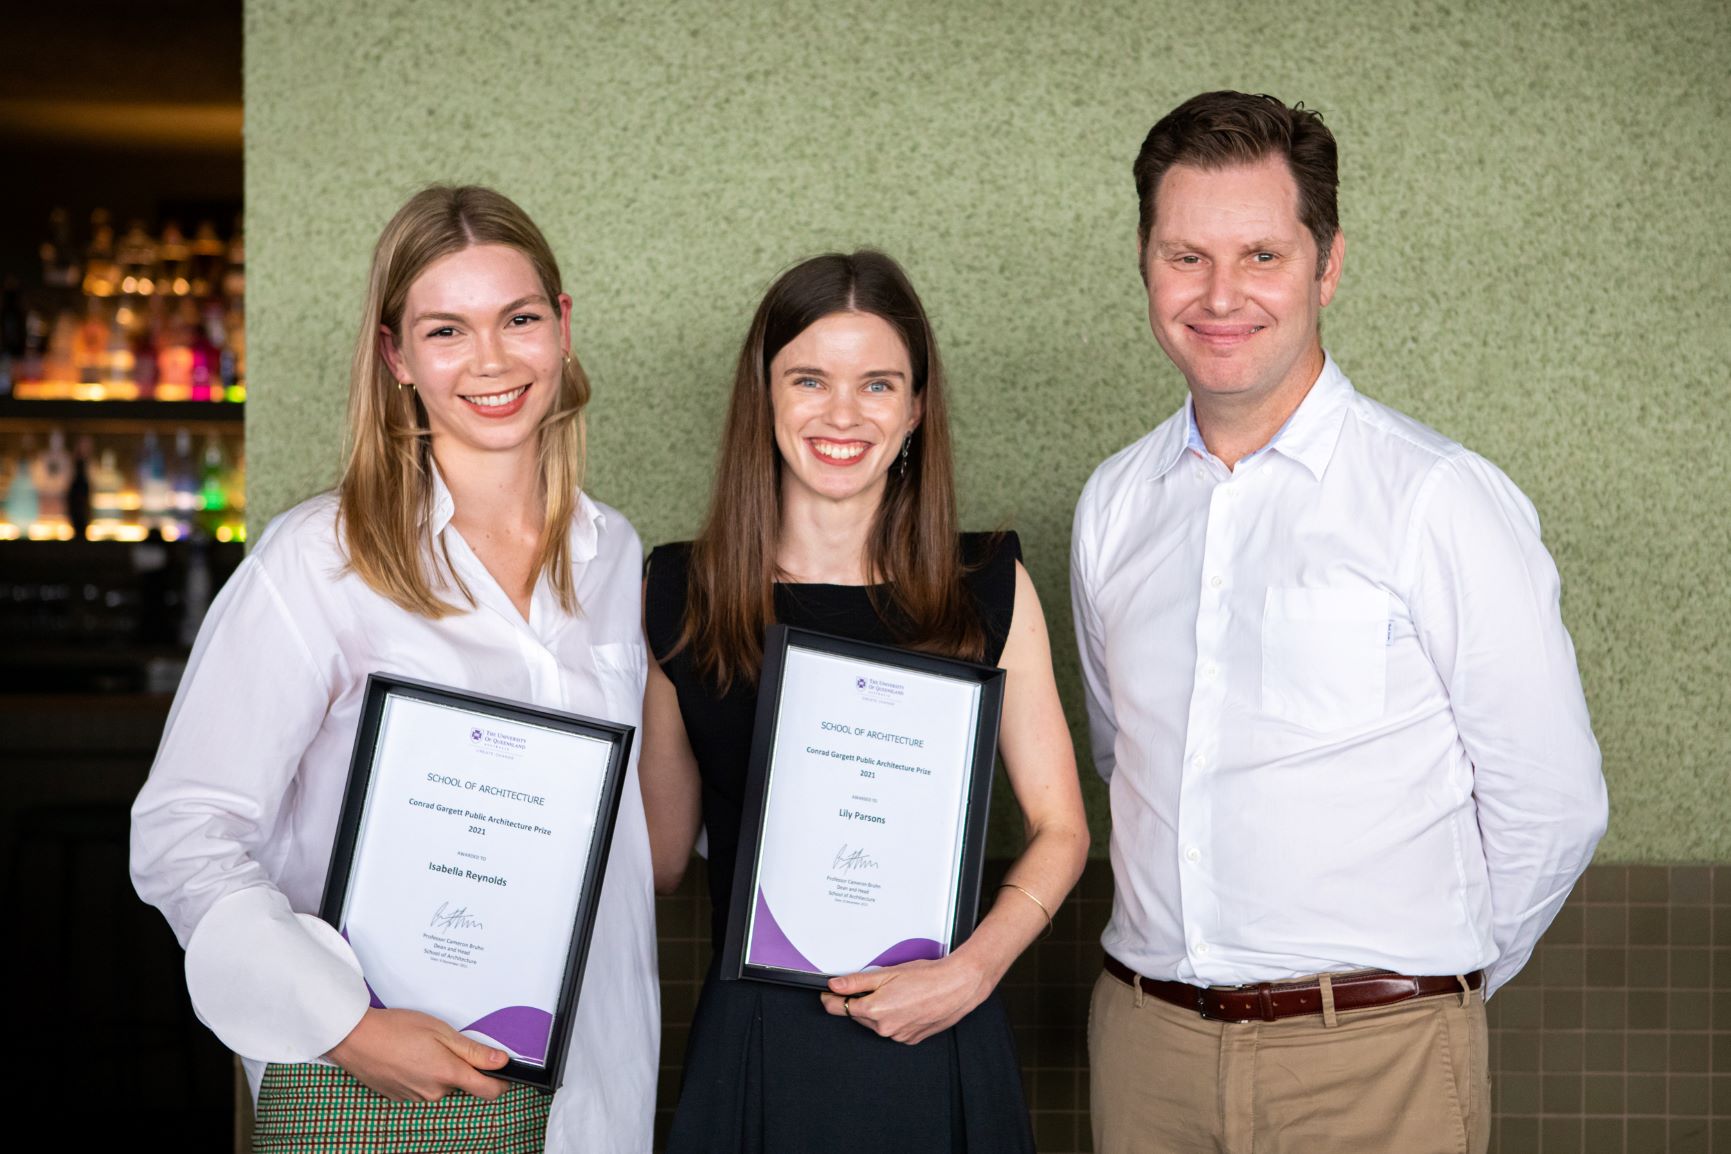 Graduands Isabella Reynolds and Lily Eire Parsons with Lawrence Toaldo, Conrad Gargett.